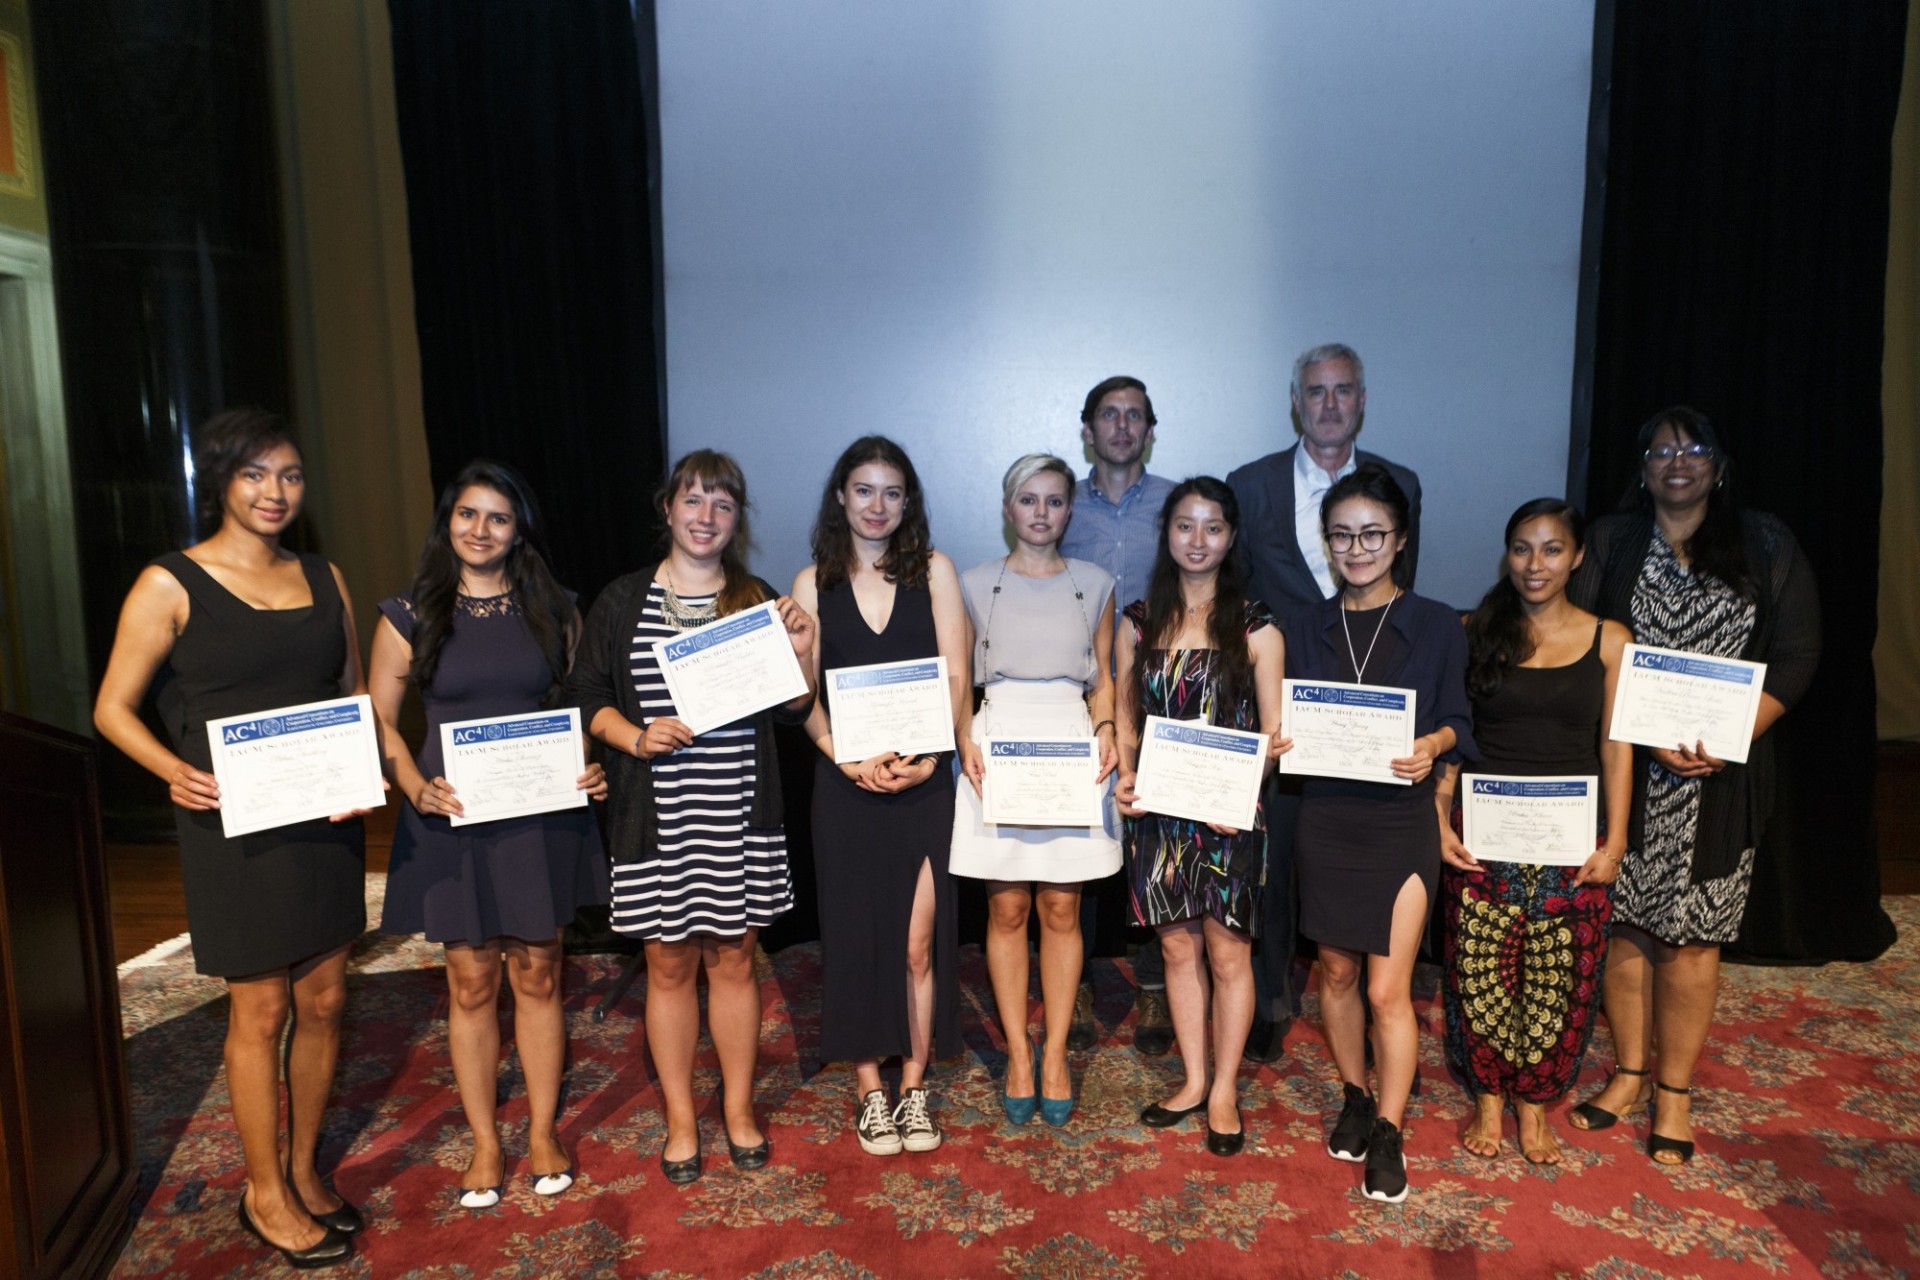 Group photo of IACM recipients receiving certificates at the closing ceremony